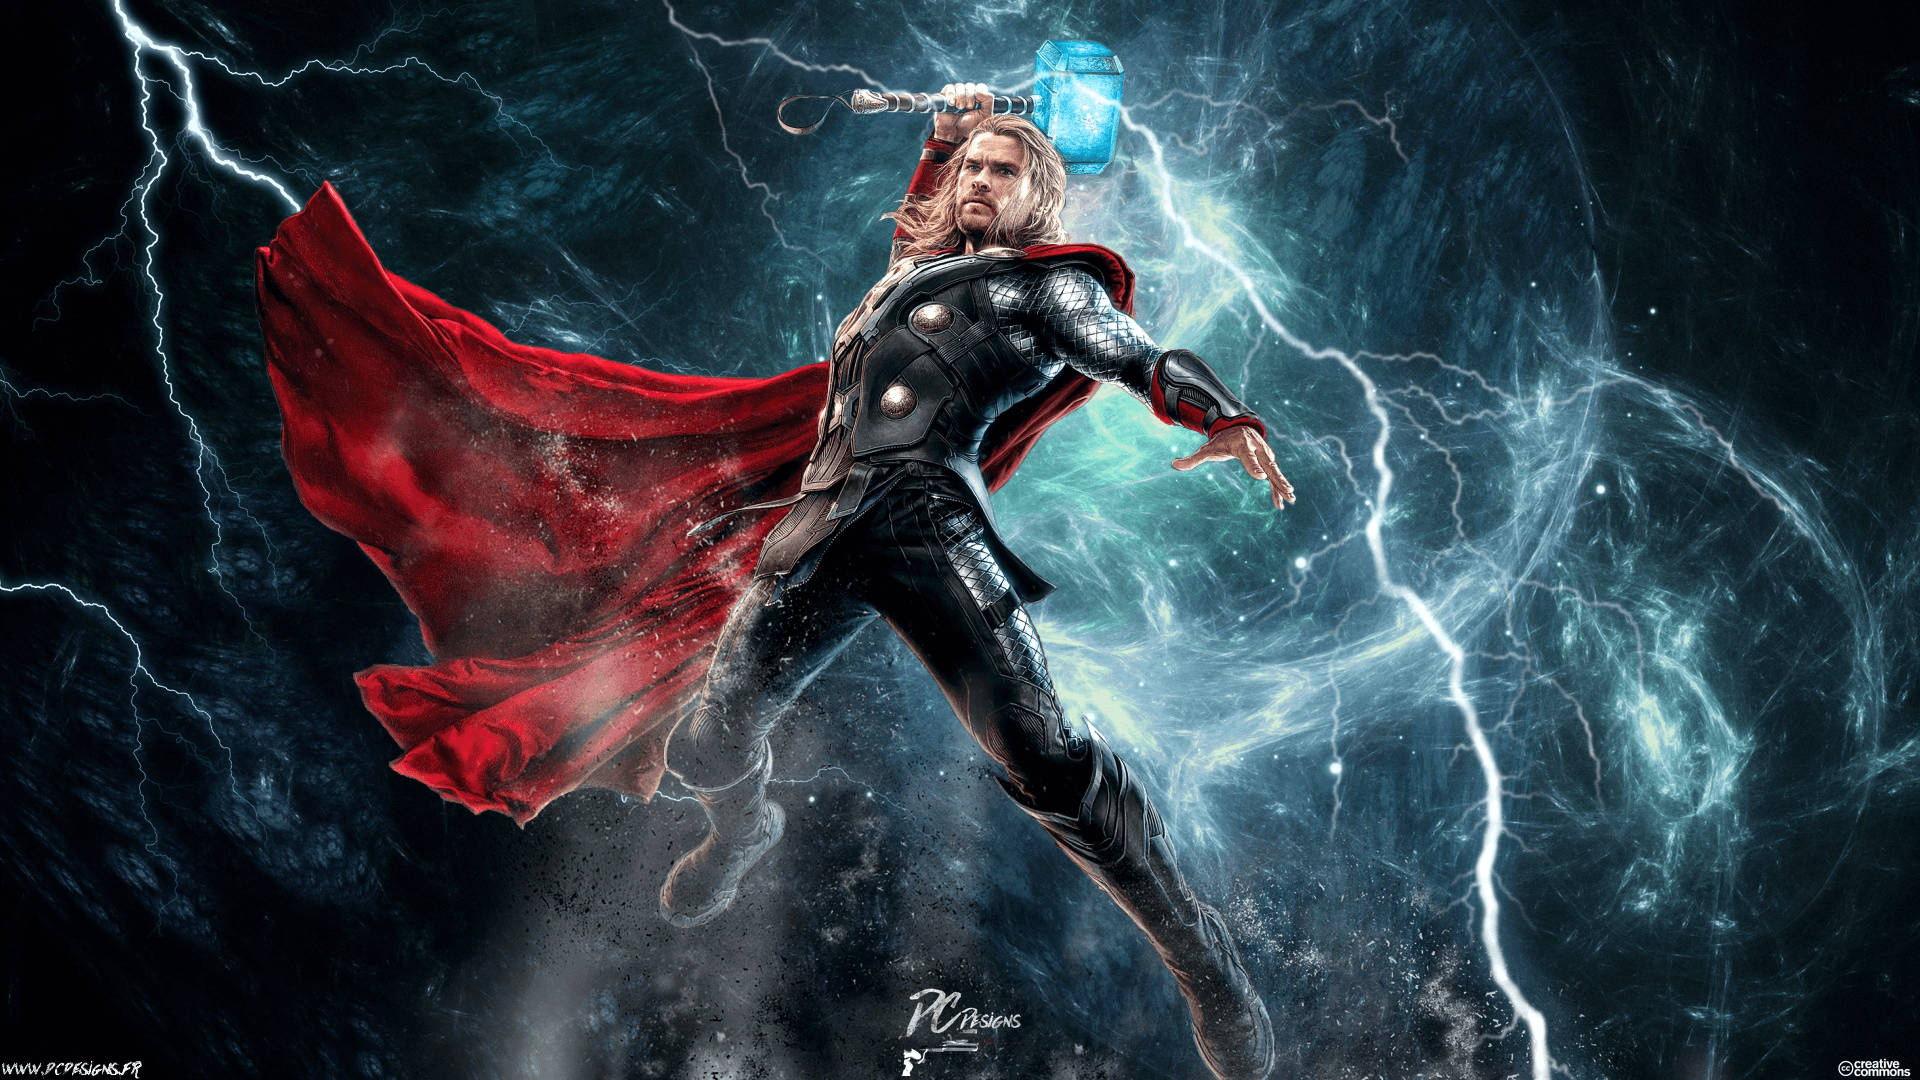 Avengers superhero, Thor with his lightning super powers surrounded by thunders.